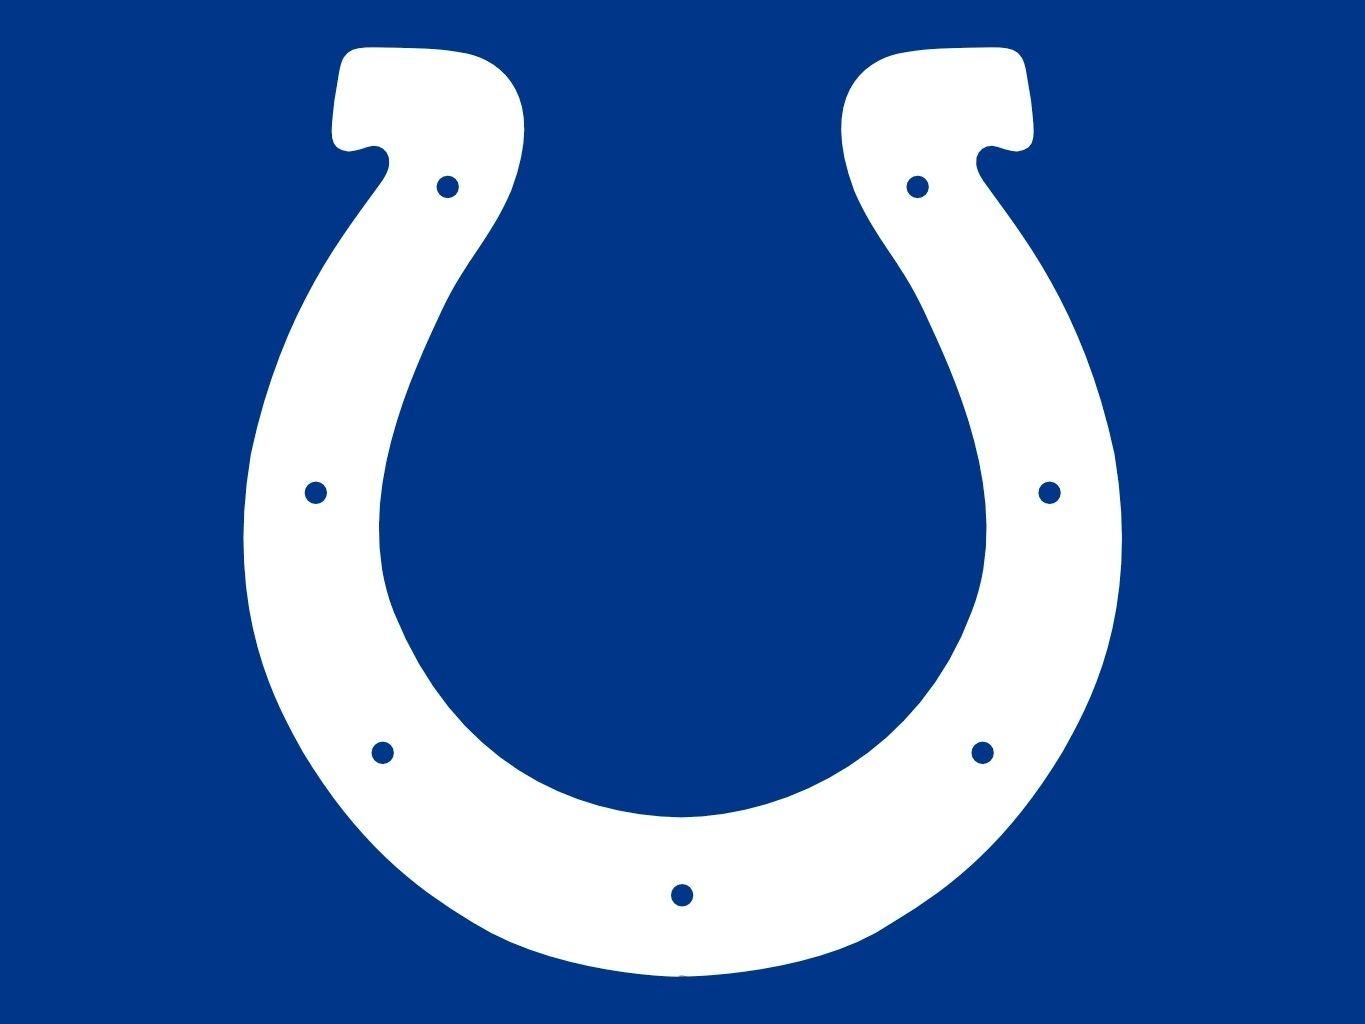 White Horseshoe Logo - Indianapolis Colts Logo, Colts Symbol Meaning, History and Evolution